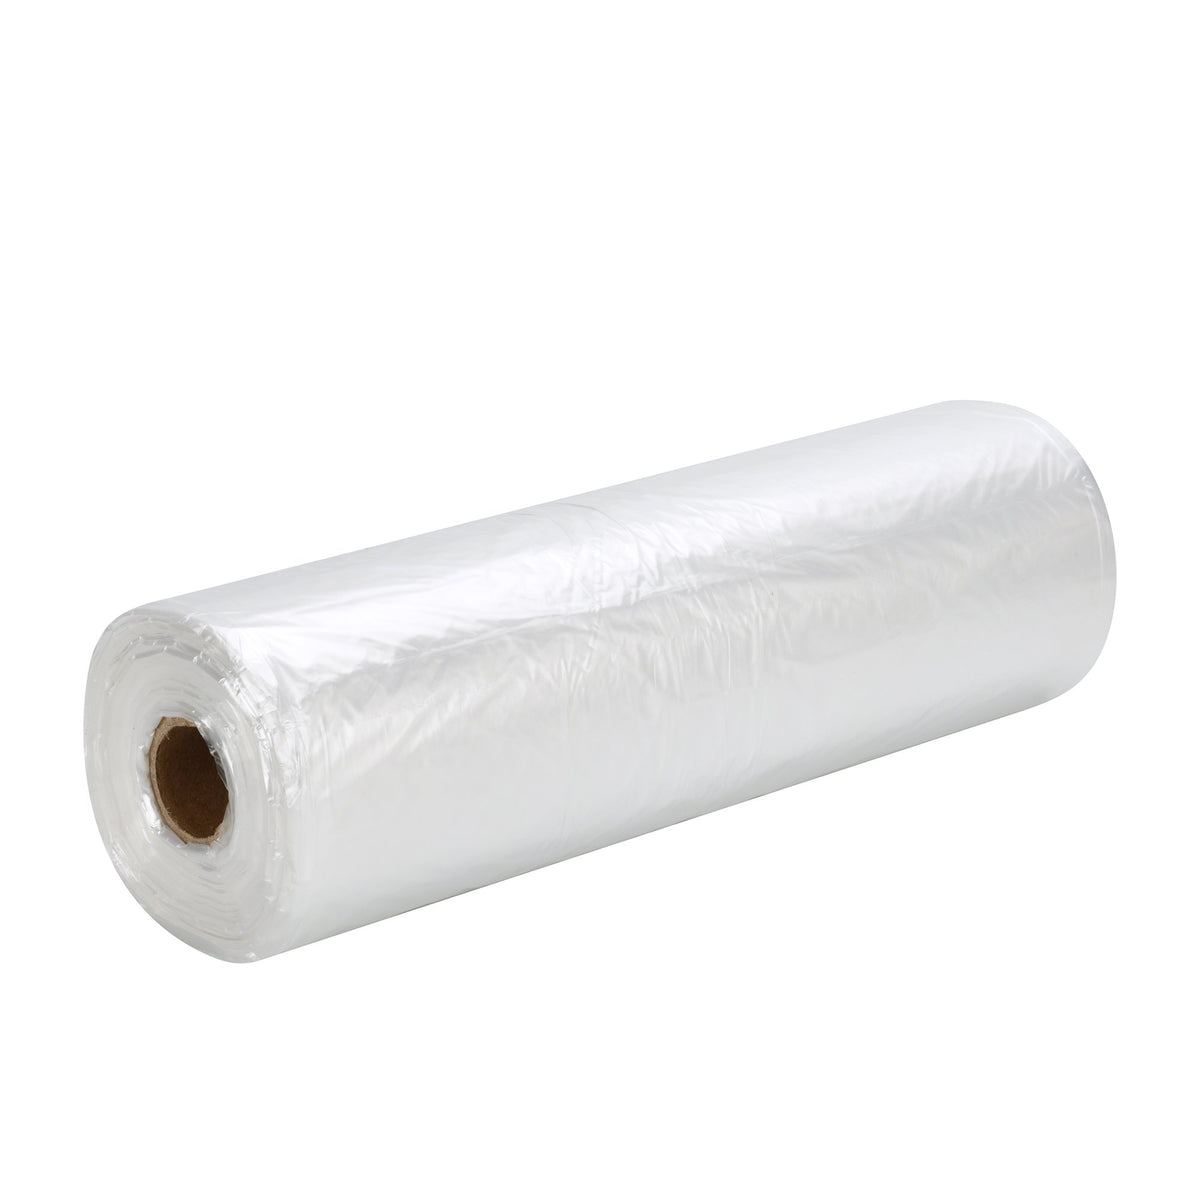 MFLABEL 12 x 20 0.5 mil Plastic Produce Clear Bag on Roll 1 Roll - 350 Bags 